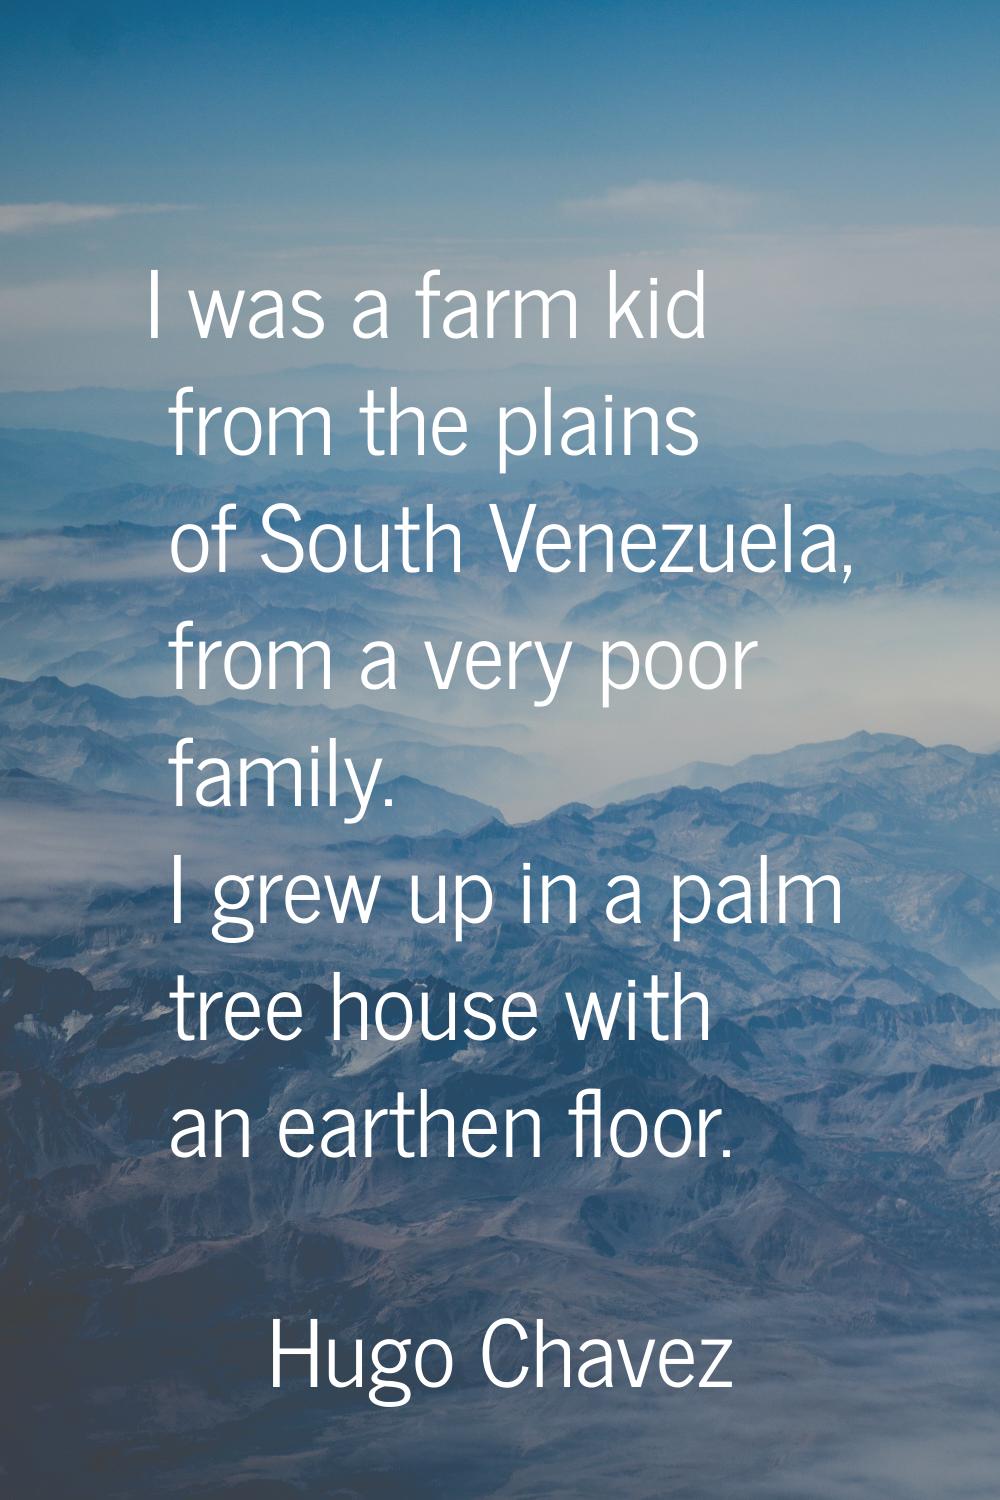 I was a farm kid from the plains of South Venezuela, from a very poor family. I grew up in a palm t